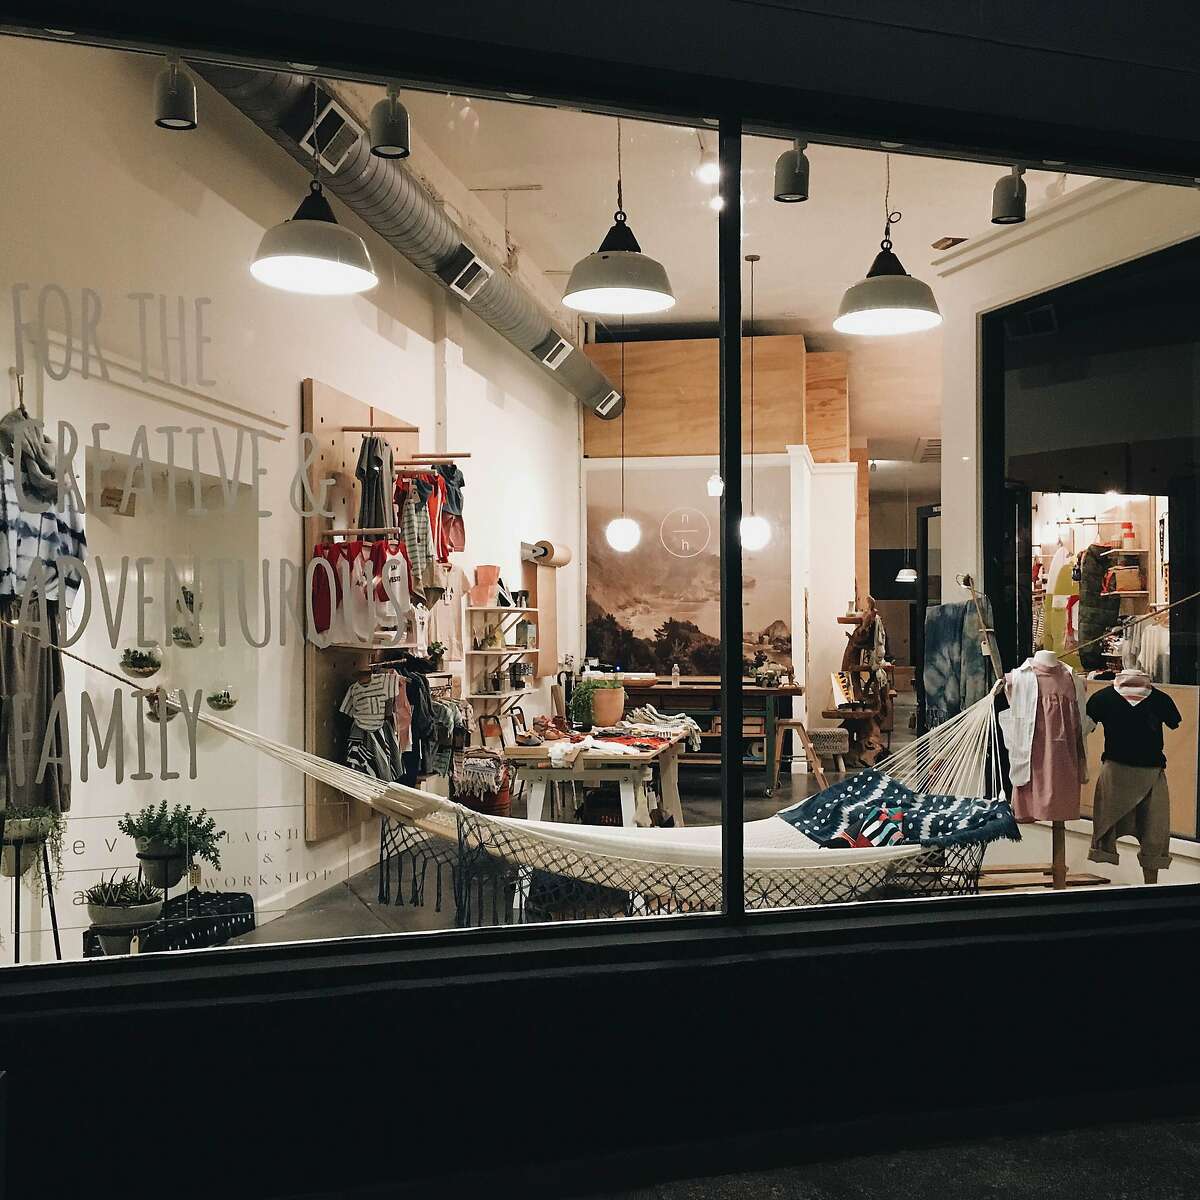 Neve & in San Anselmo has opened a brick-and-mortar space to "inspire entire families to get adventurous and creative," says co-owner Kris�Galmarini. The store is named for she and husband/co-owner Bob's�9-year-old daughter, Neve, 5-year-old son Shep (middle name Hawk).